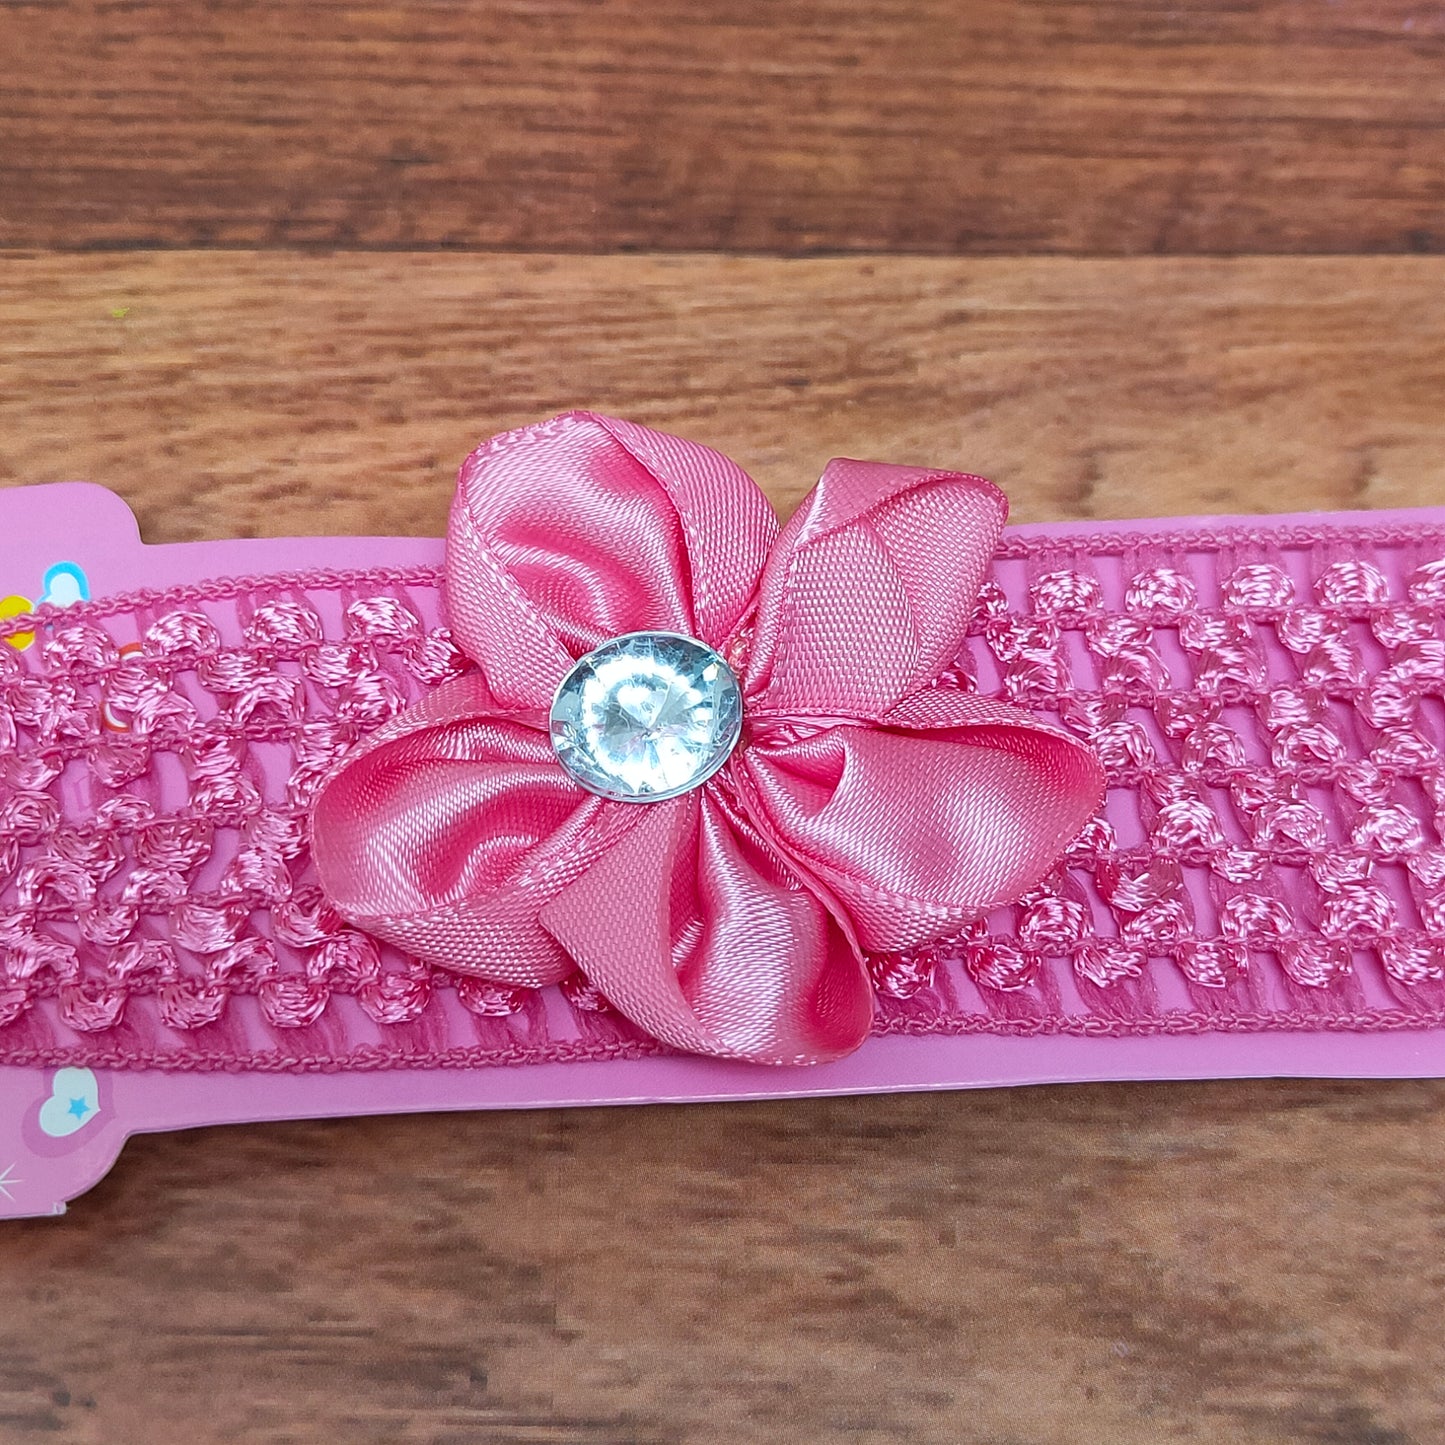 Floral Soft Stretchy Headbands for Baby Girls and Newborn (17-33 Baby Headband)